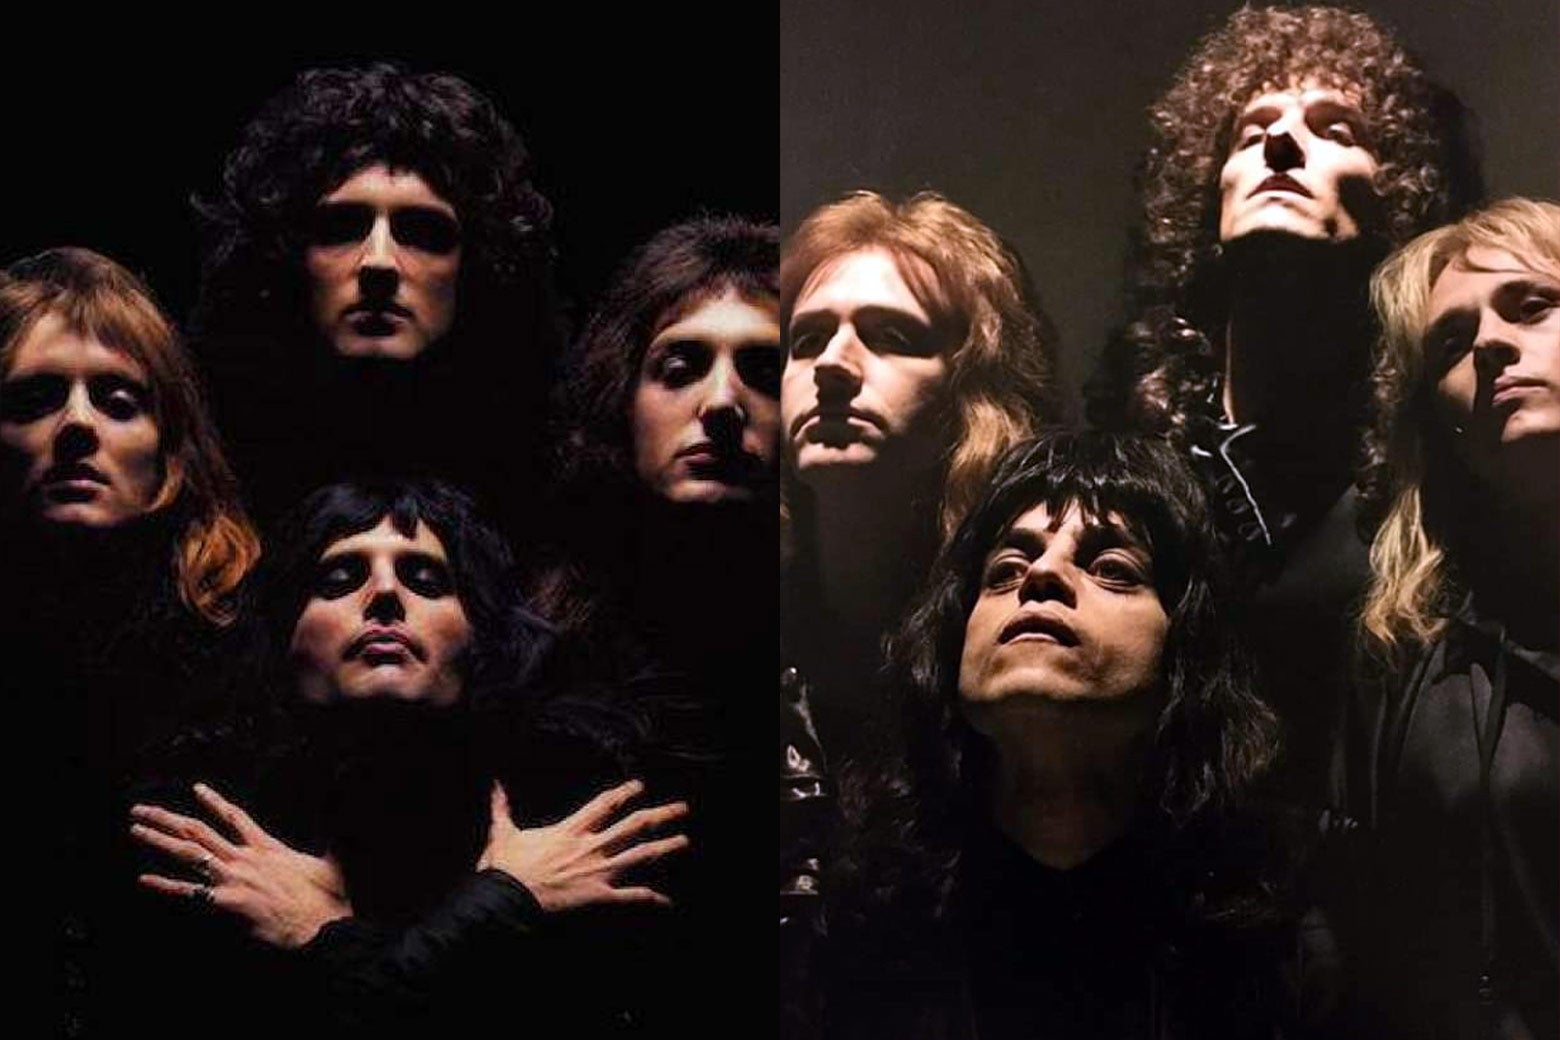 The band in the Bohemian Rhapsody video, in real life and in the movie.